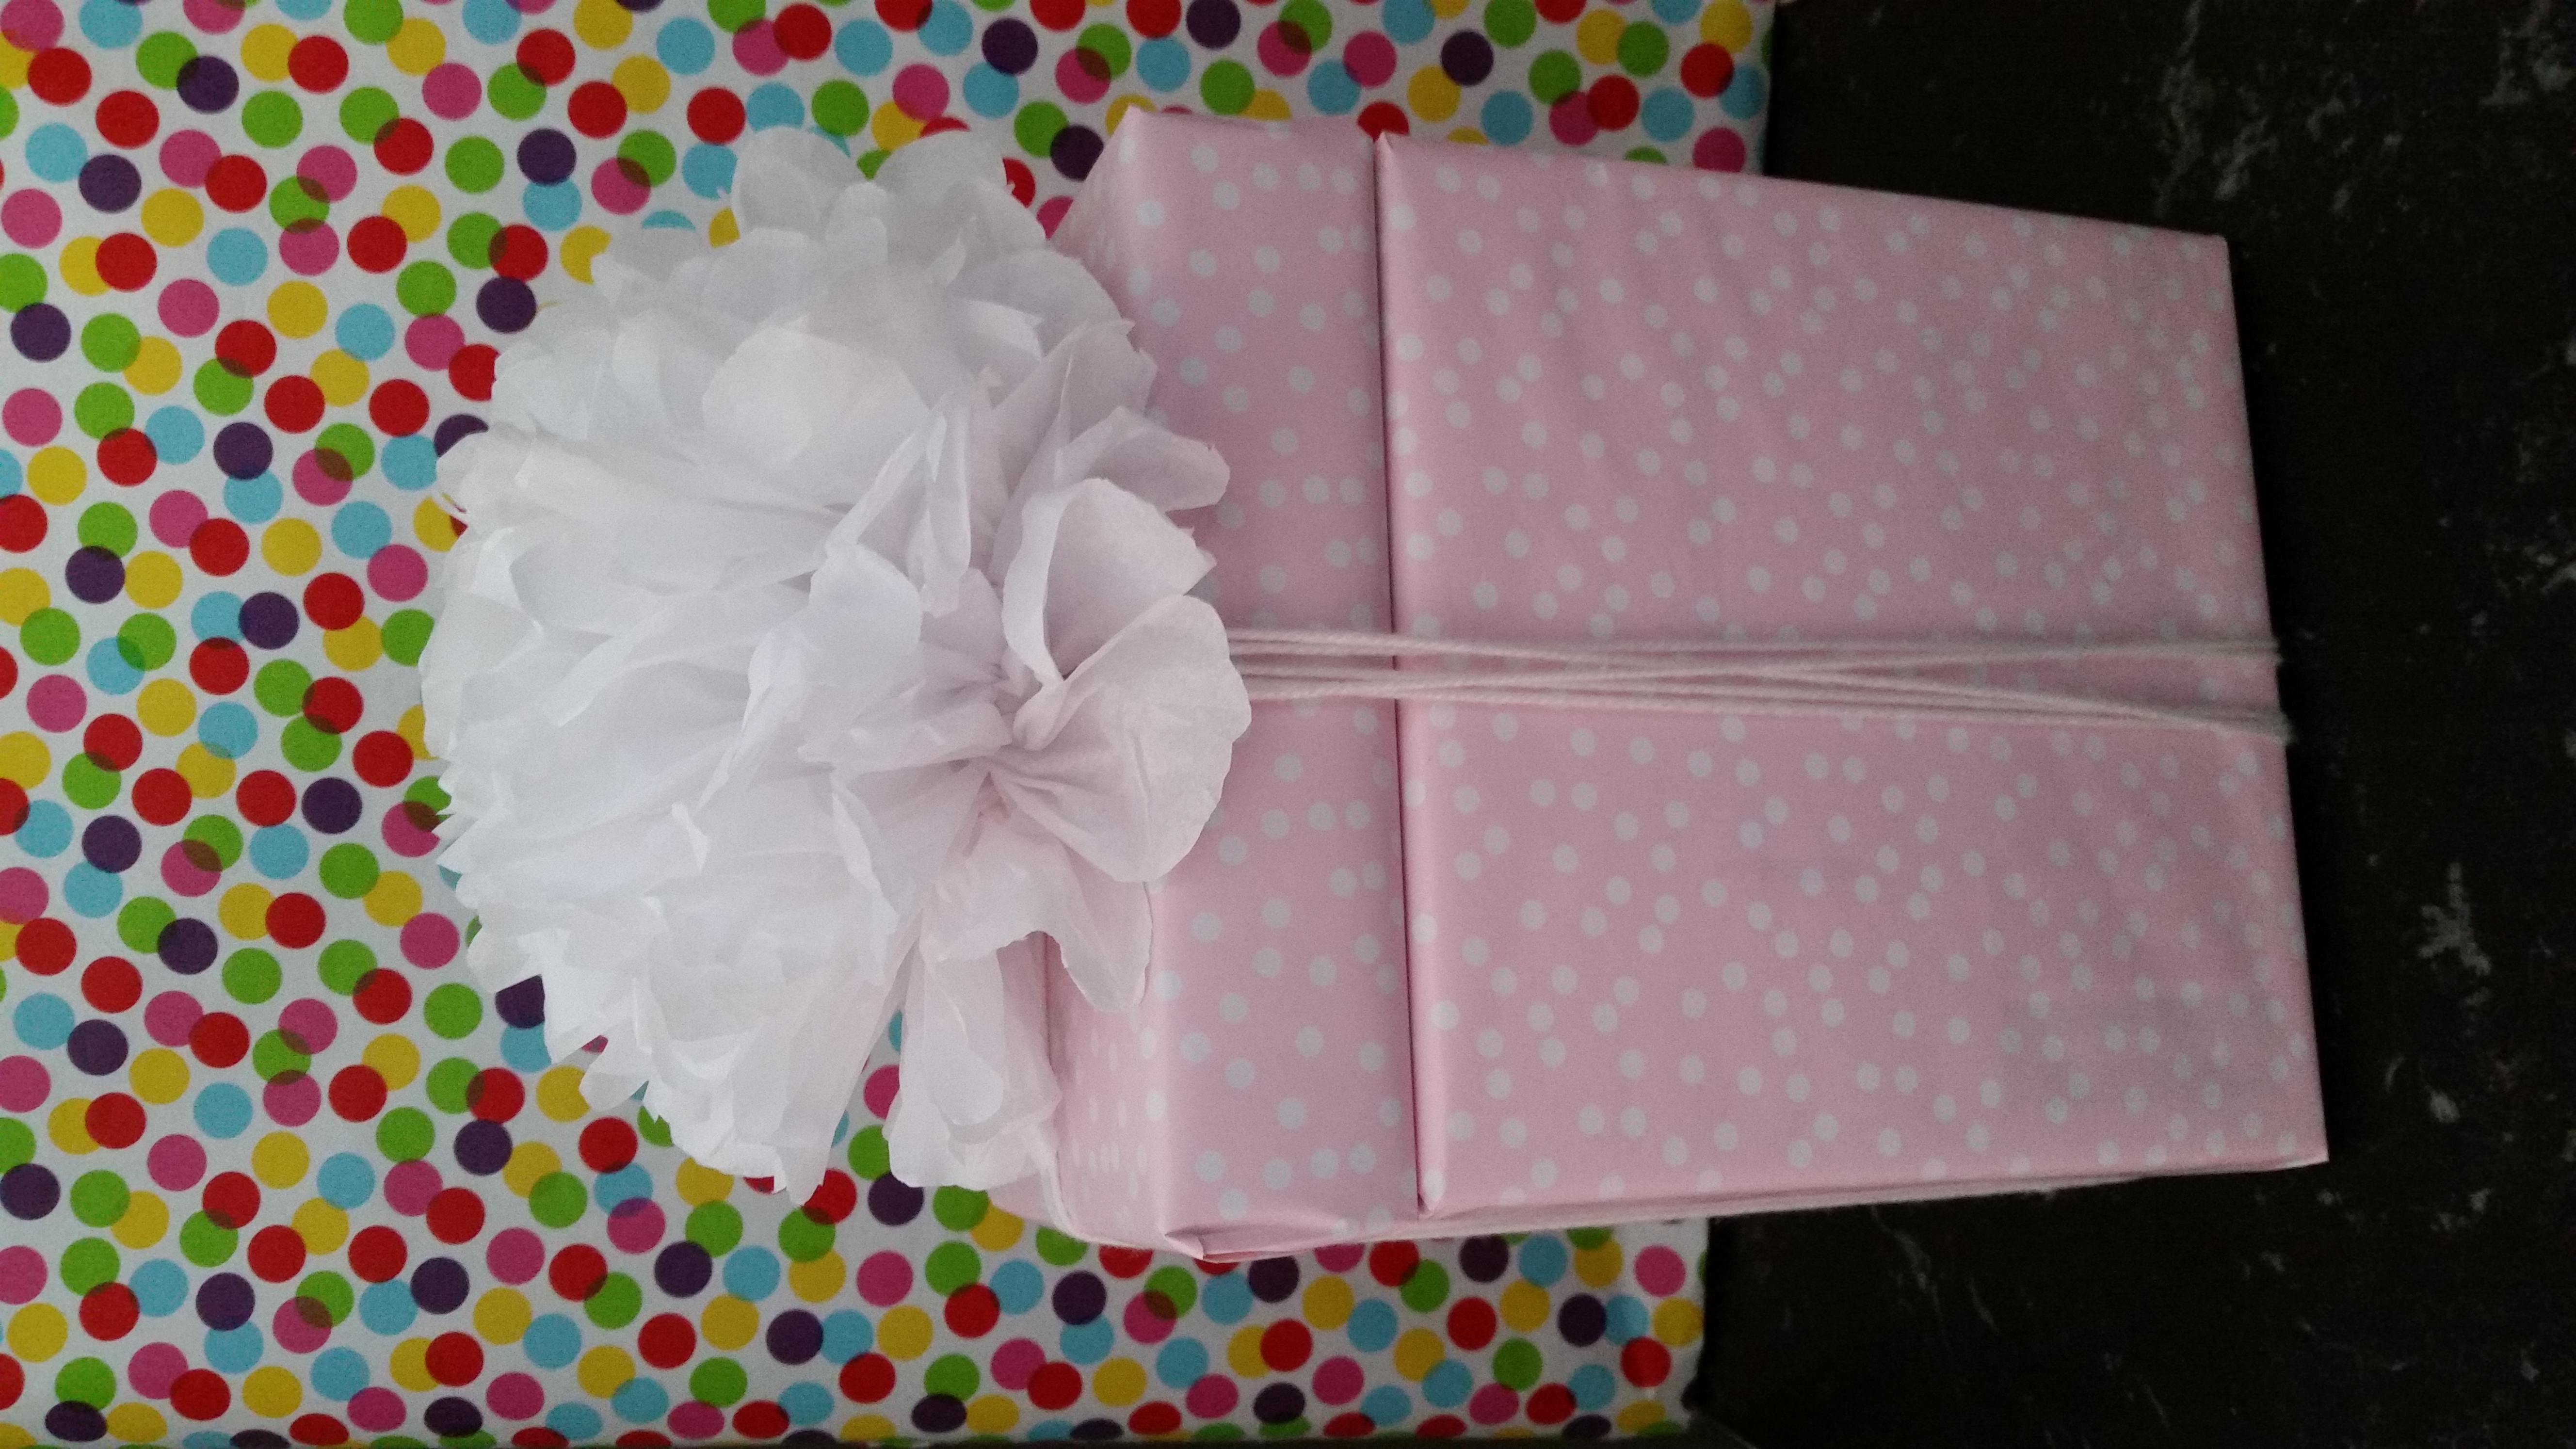 Recycle cardboxes for gift wrapping www.domesblissity.com